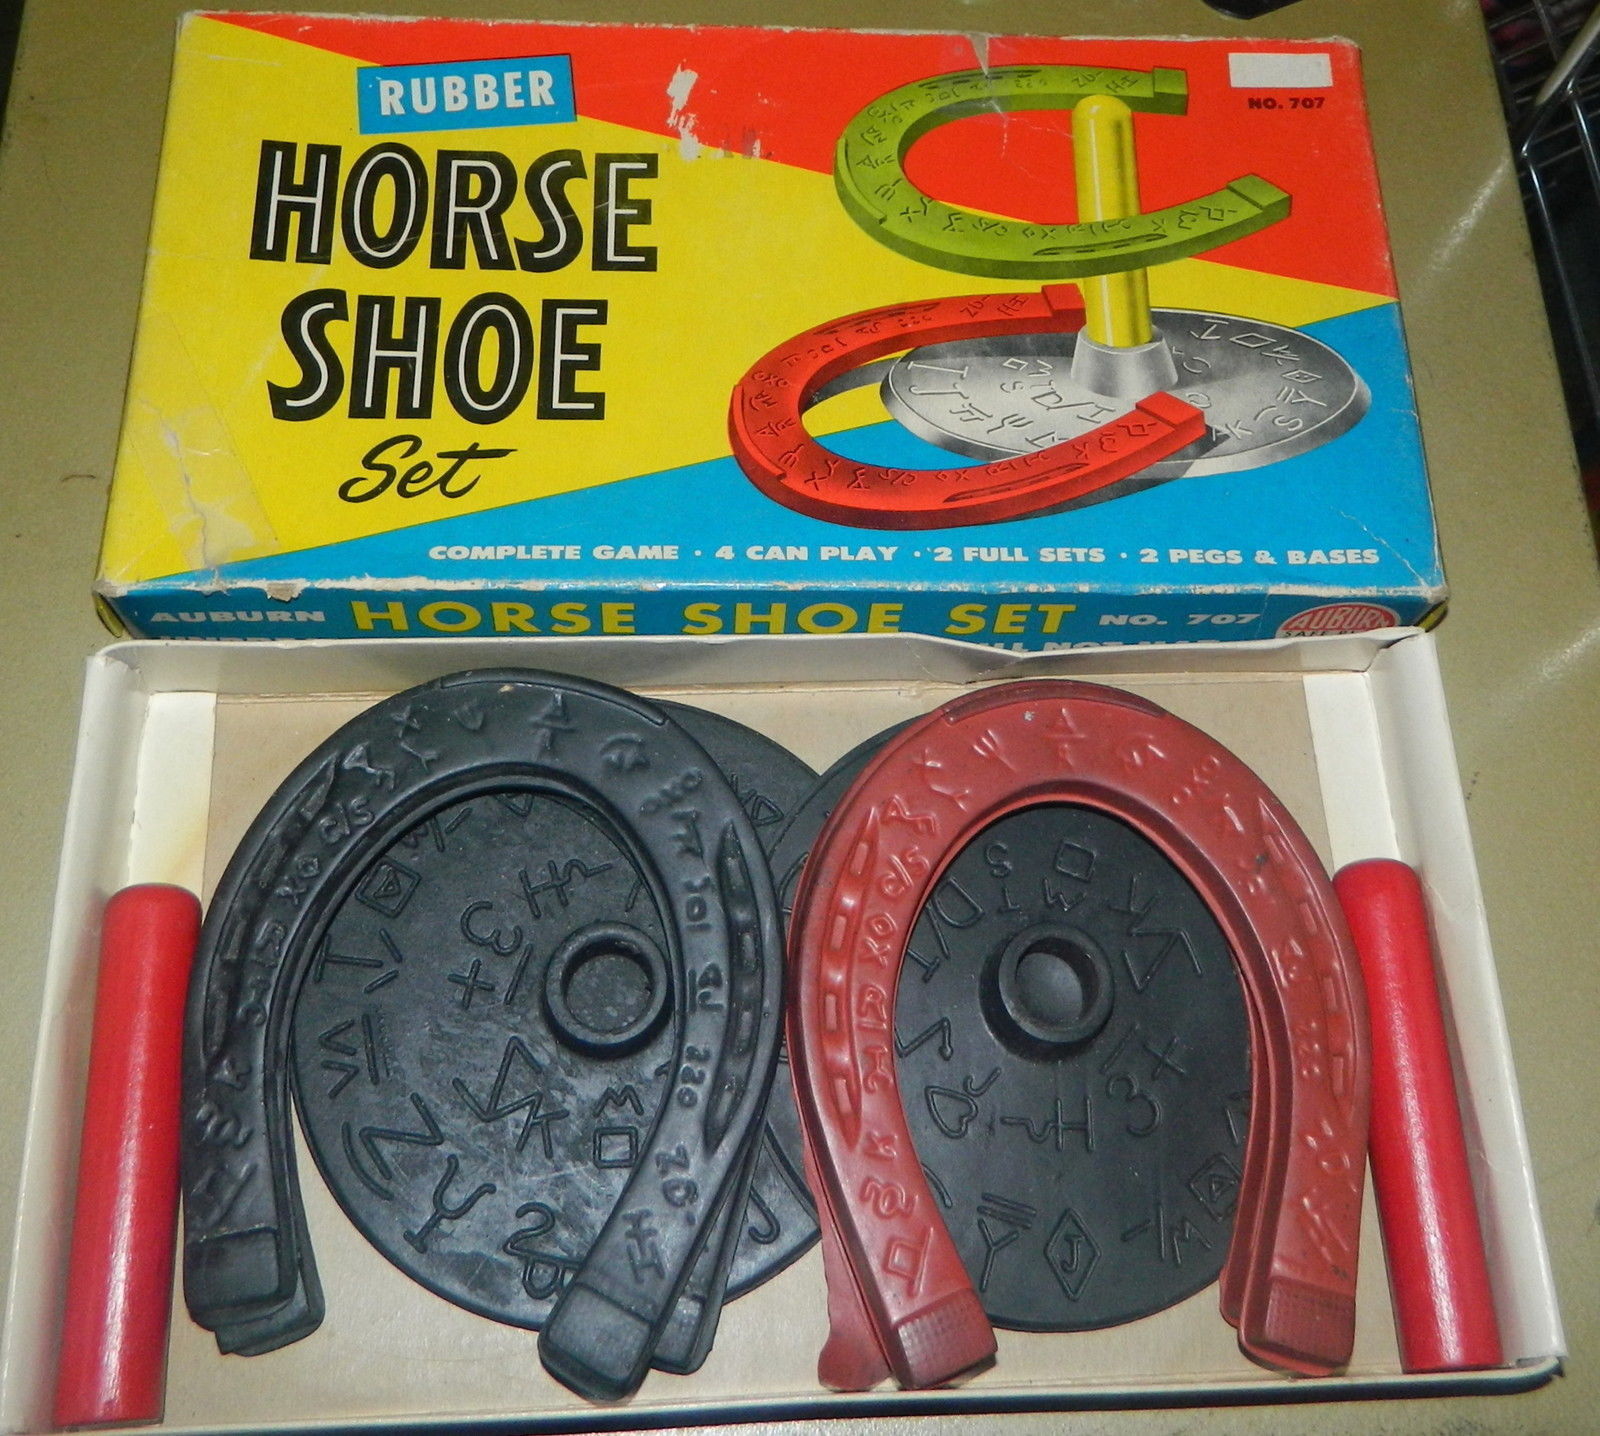 Primary image for Rubber Horse Shoe Vintage  Game-Complete